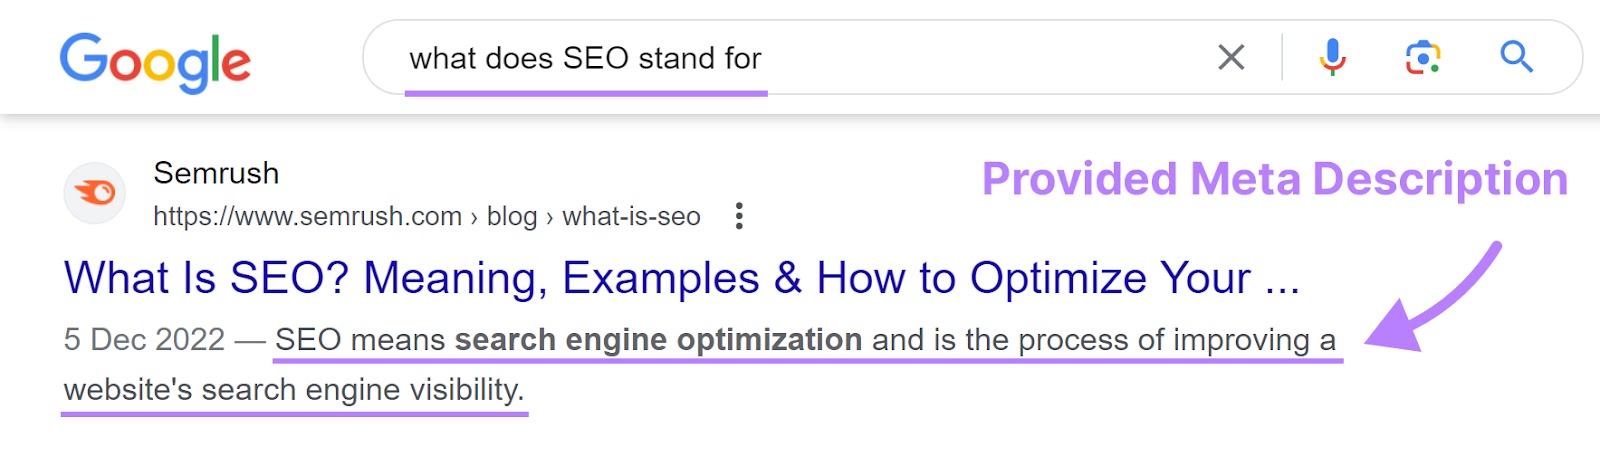 Search engine result showing a provided meta description.